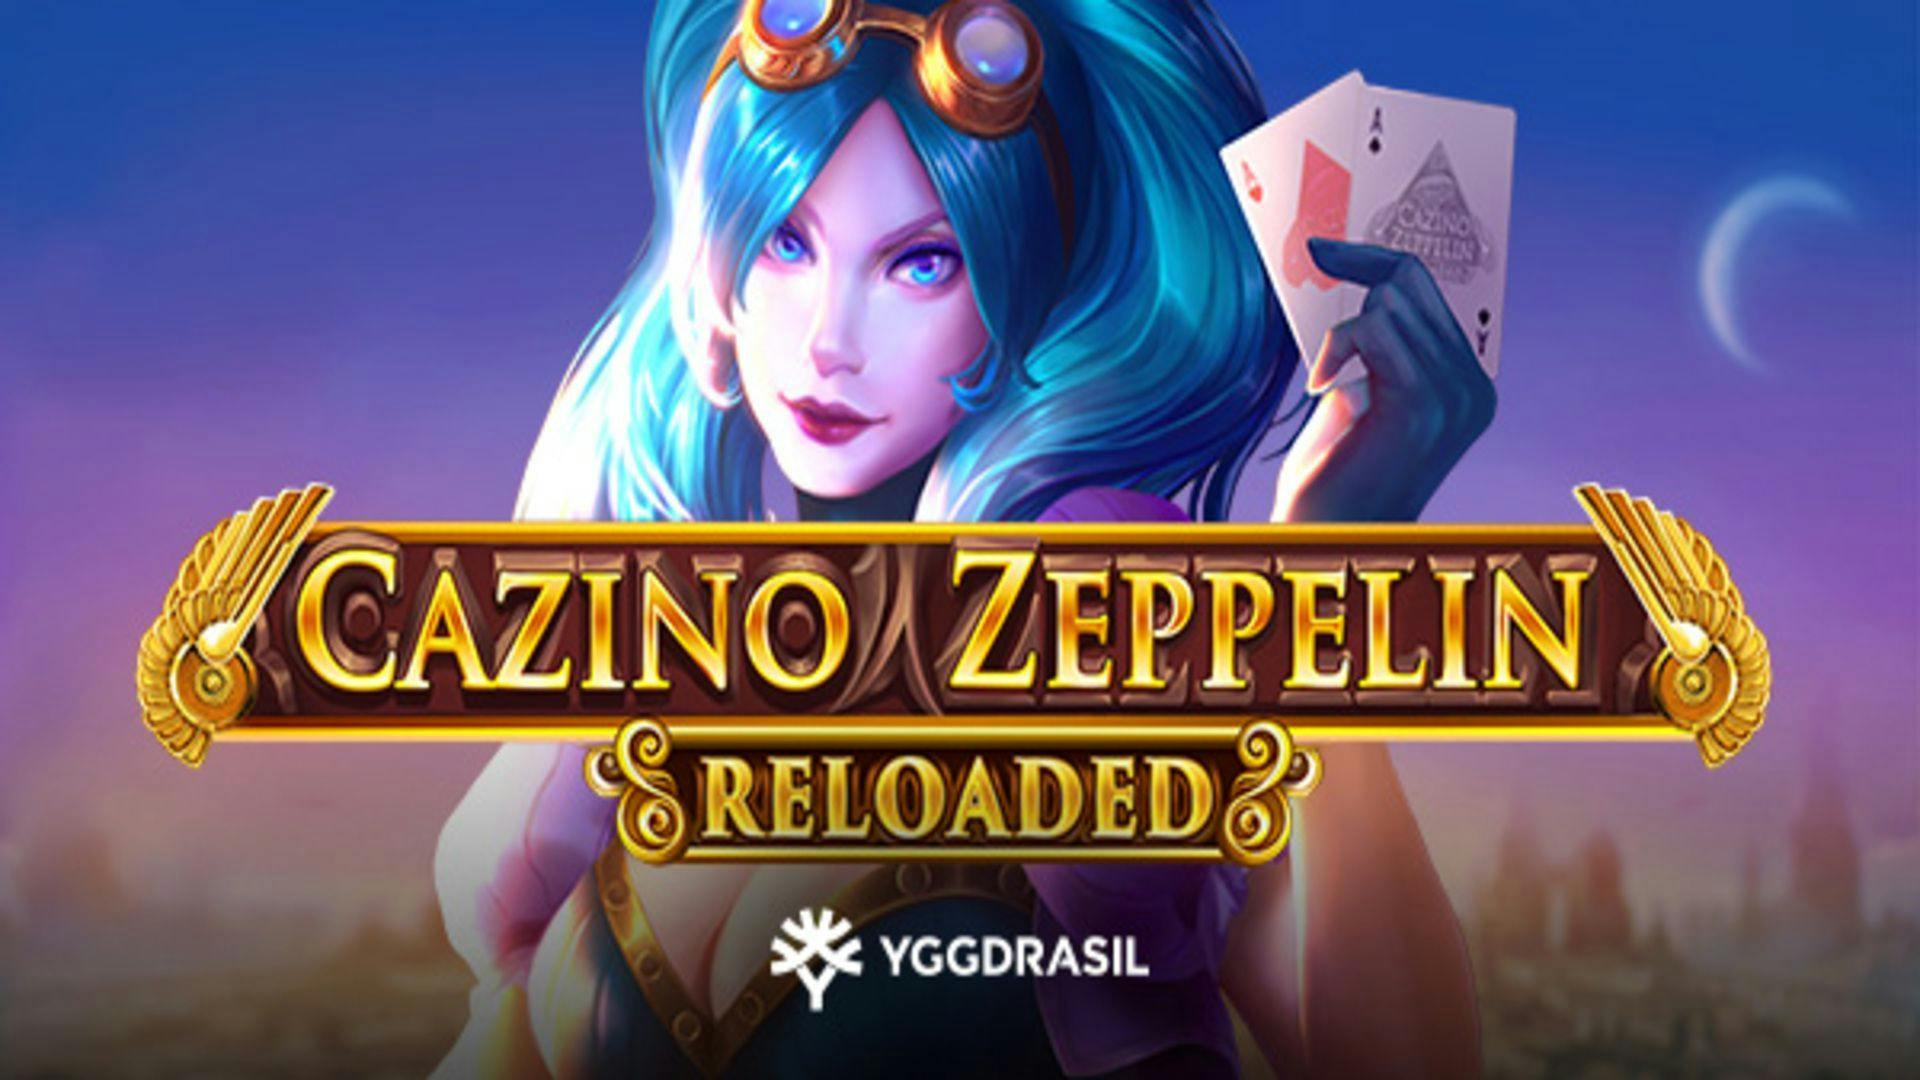 Cazino Zeppelin Reloaded Slot Machine Free Game Play